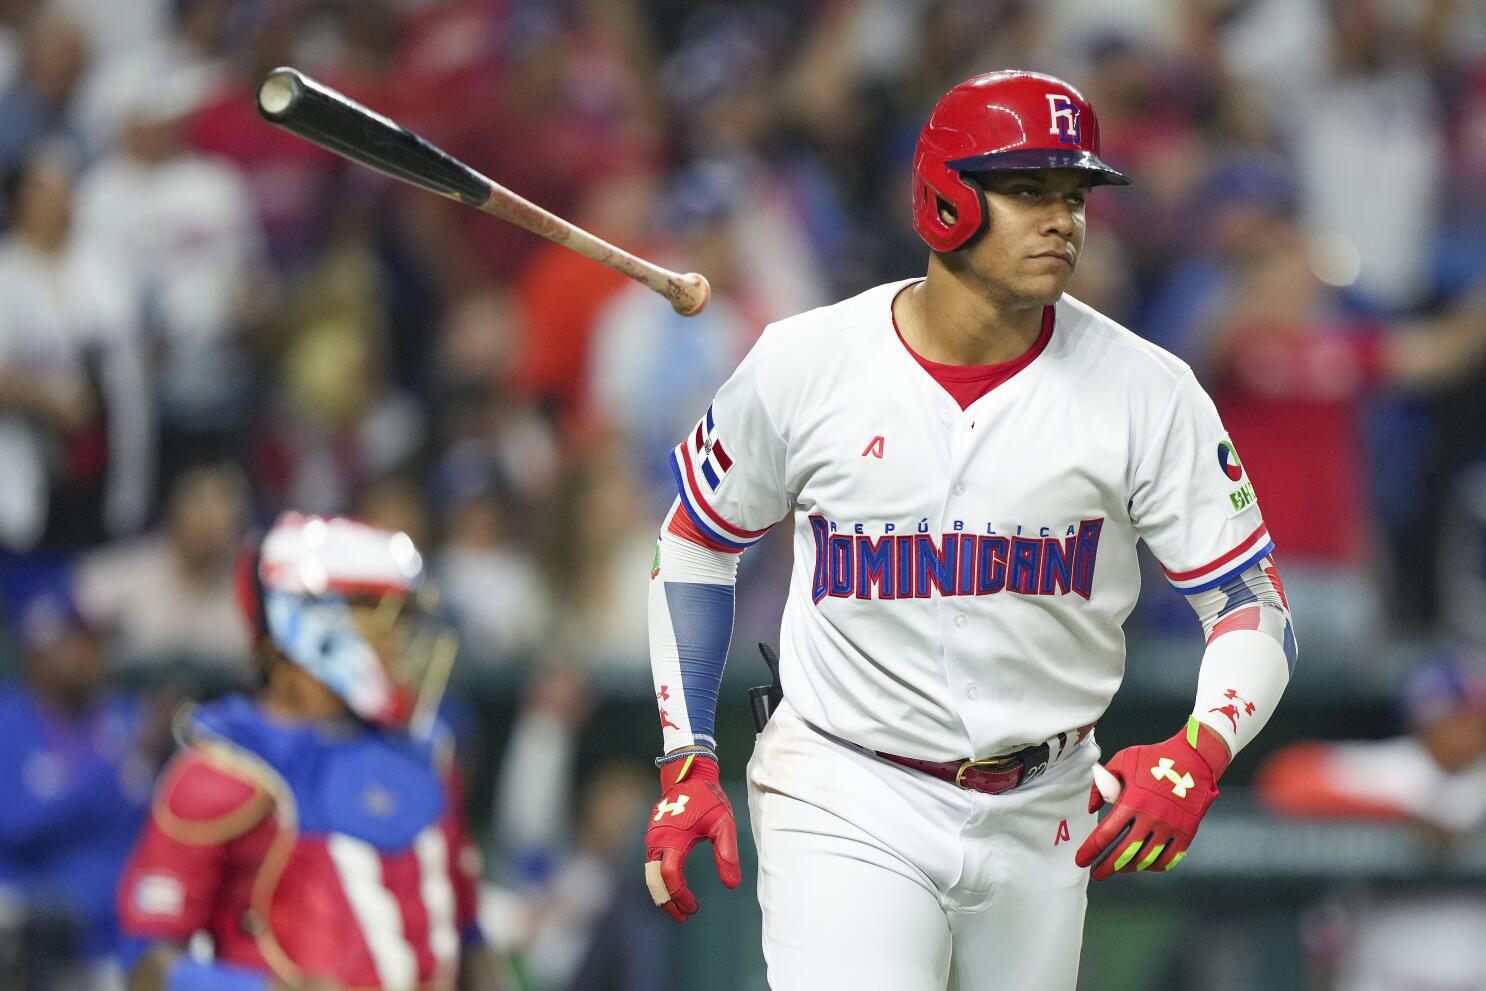 For players such as Manny Machado, last weekend proves the WBC